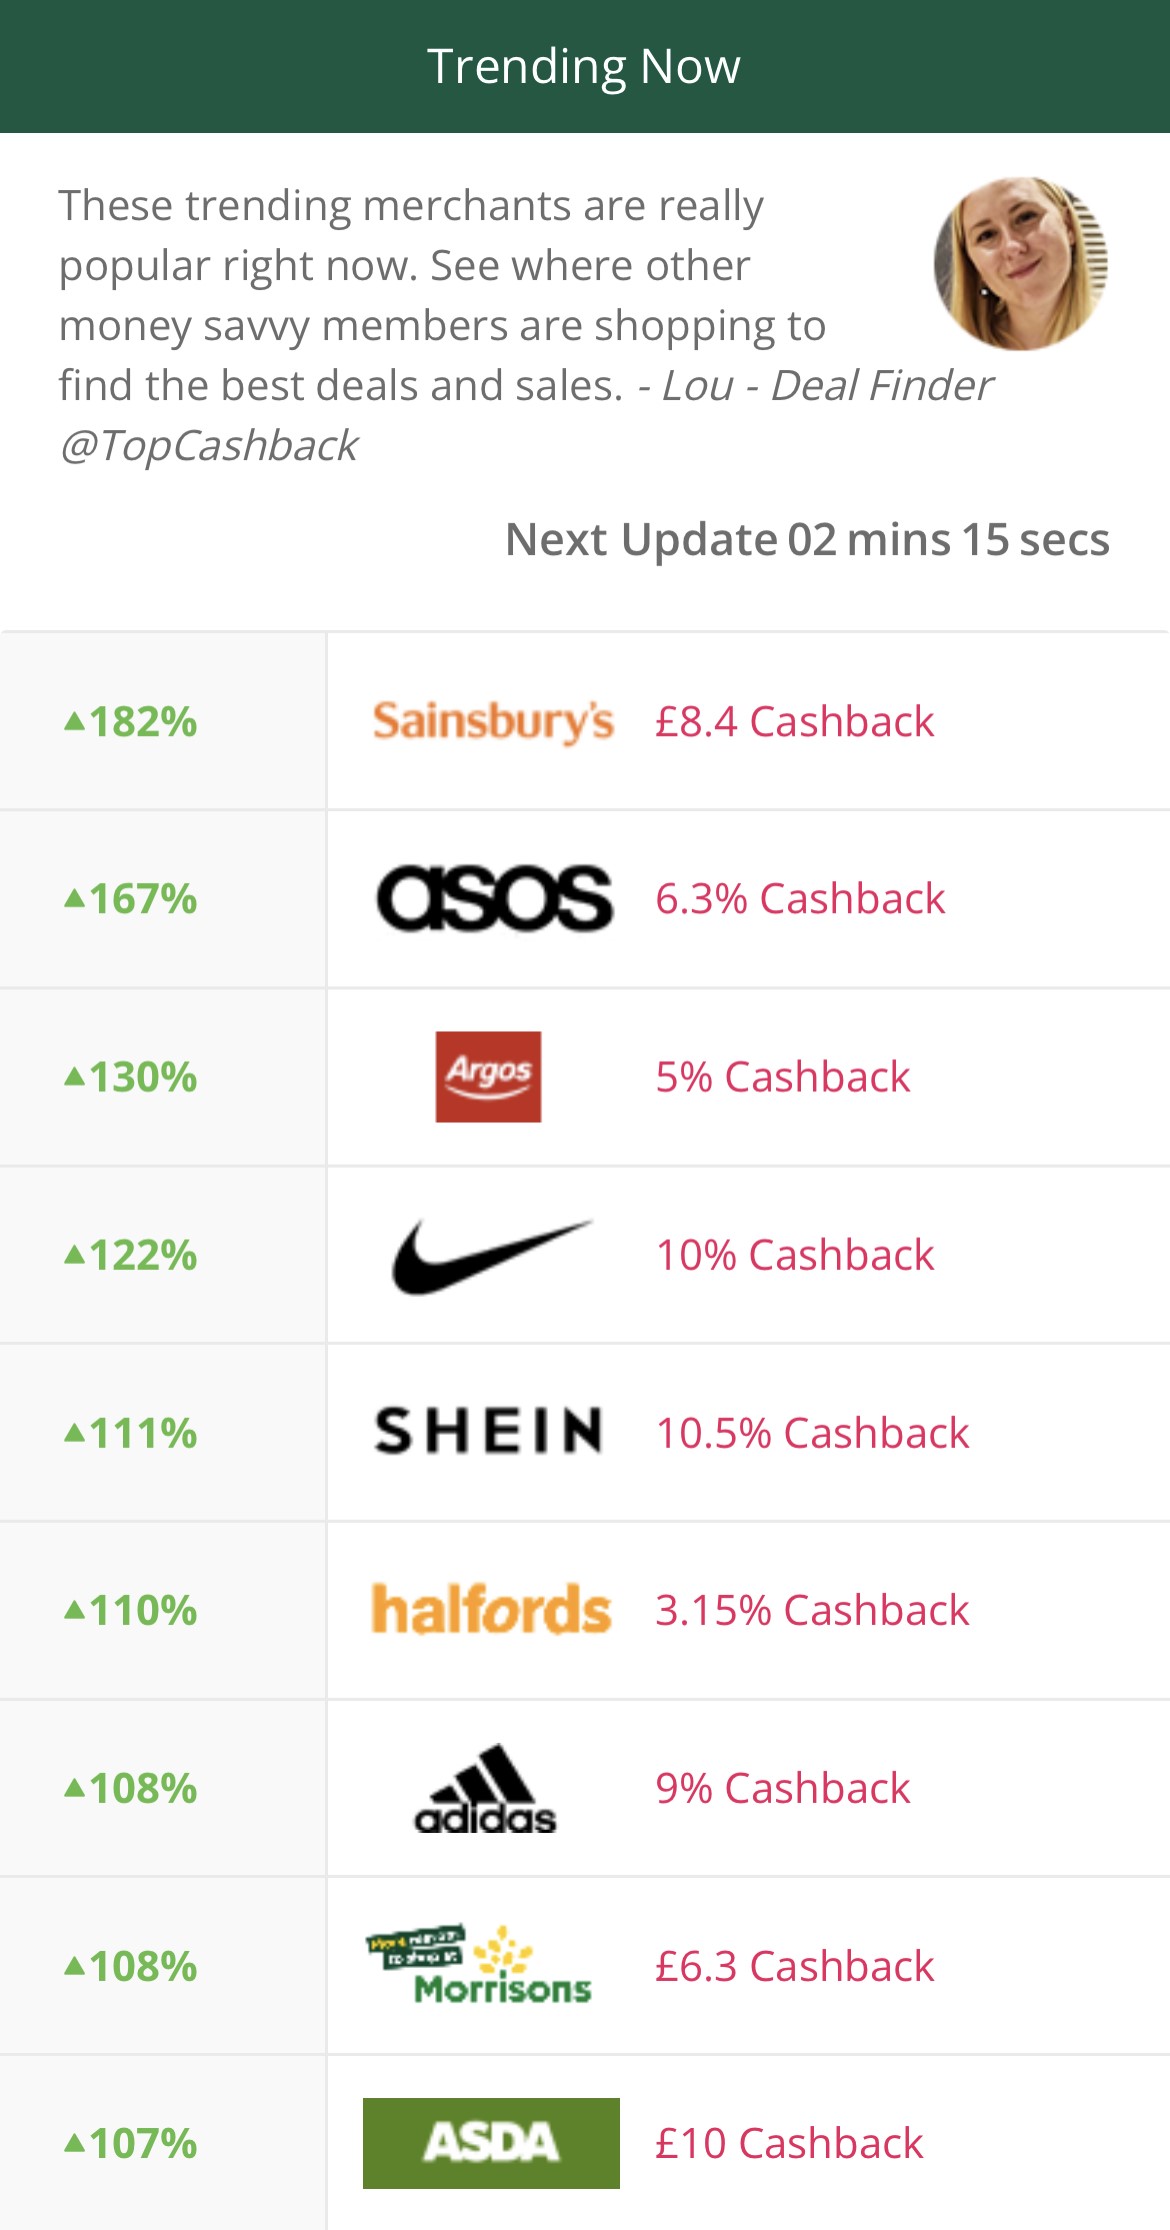 TopCashback Trending Now page